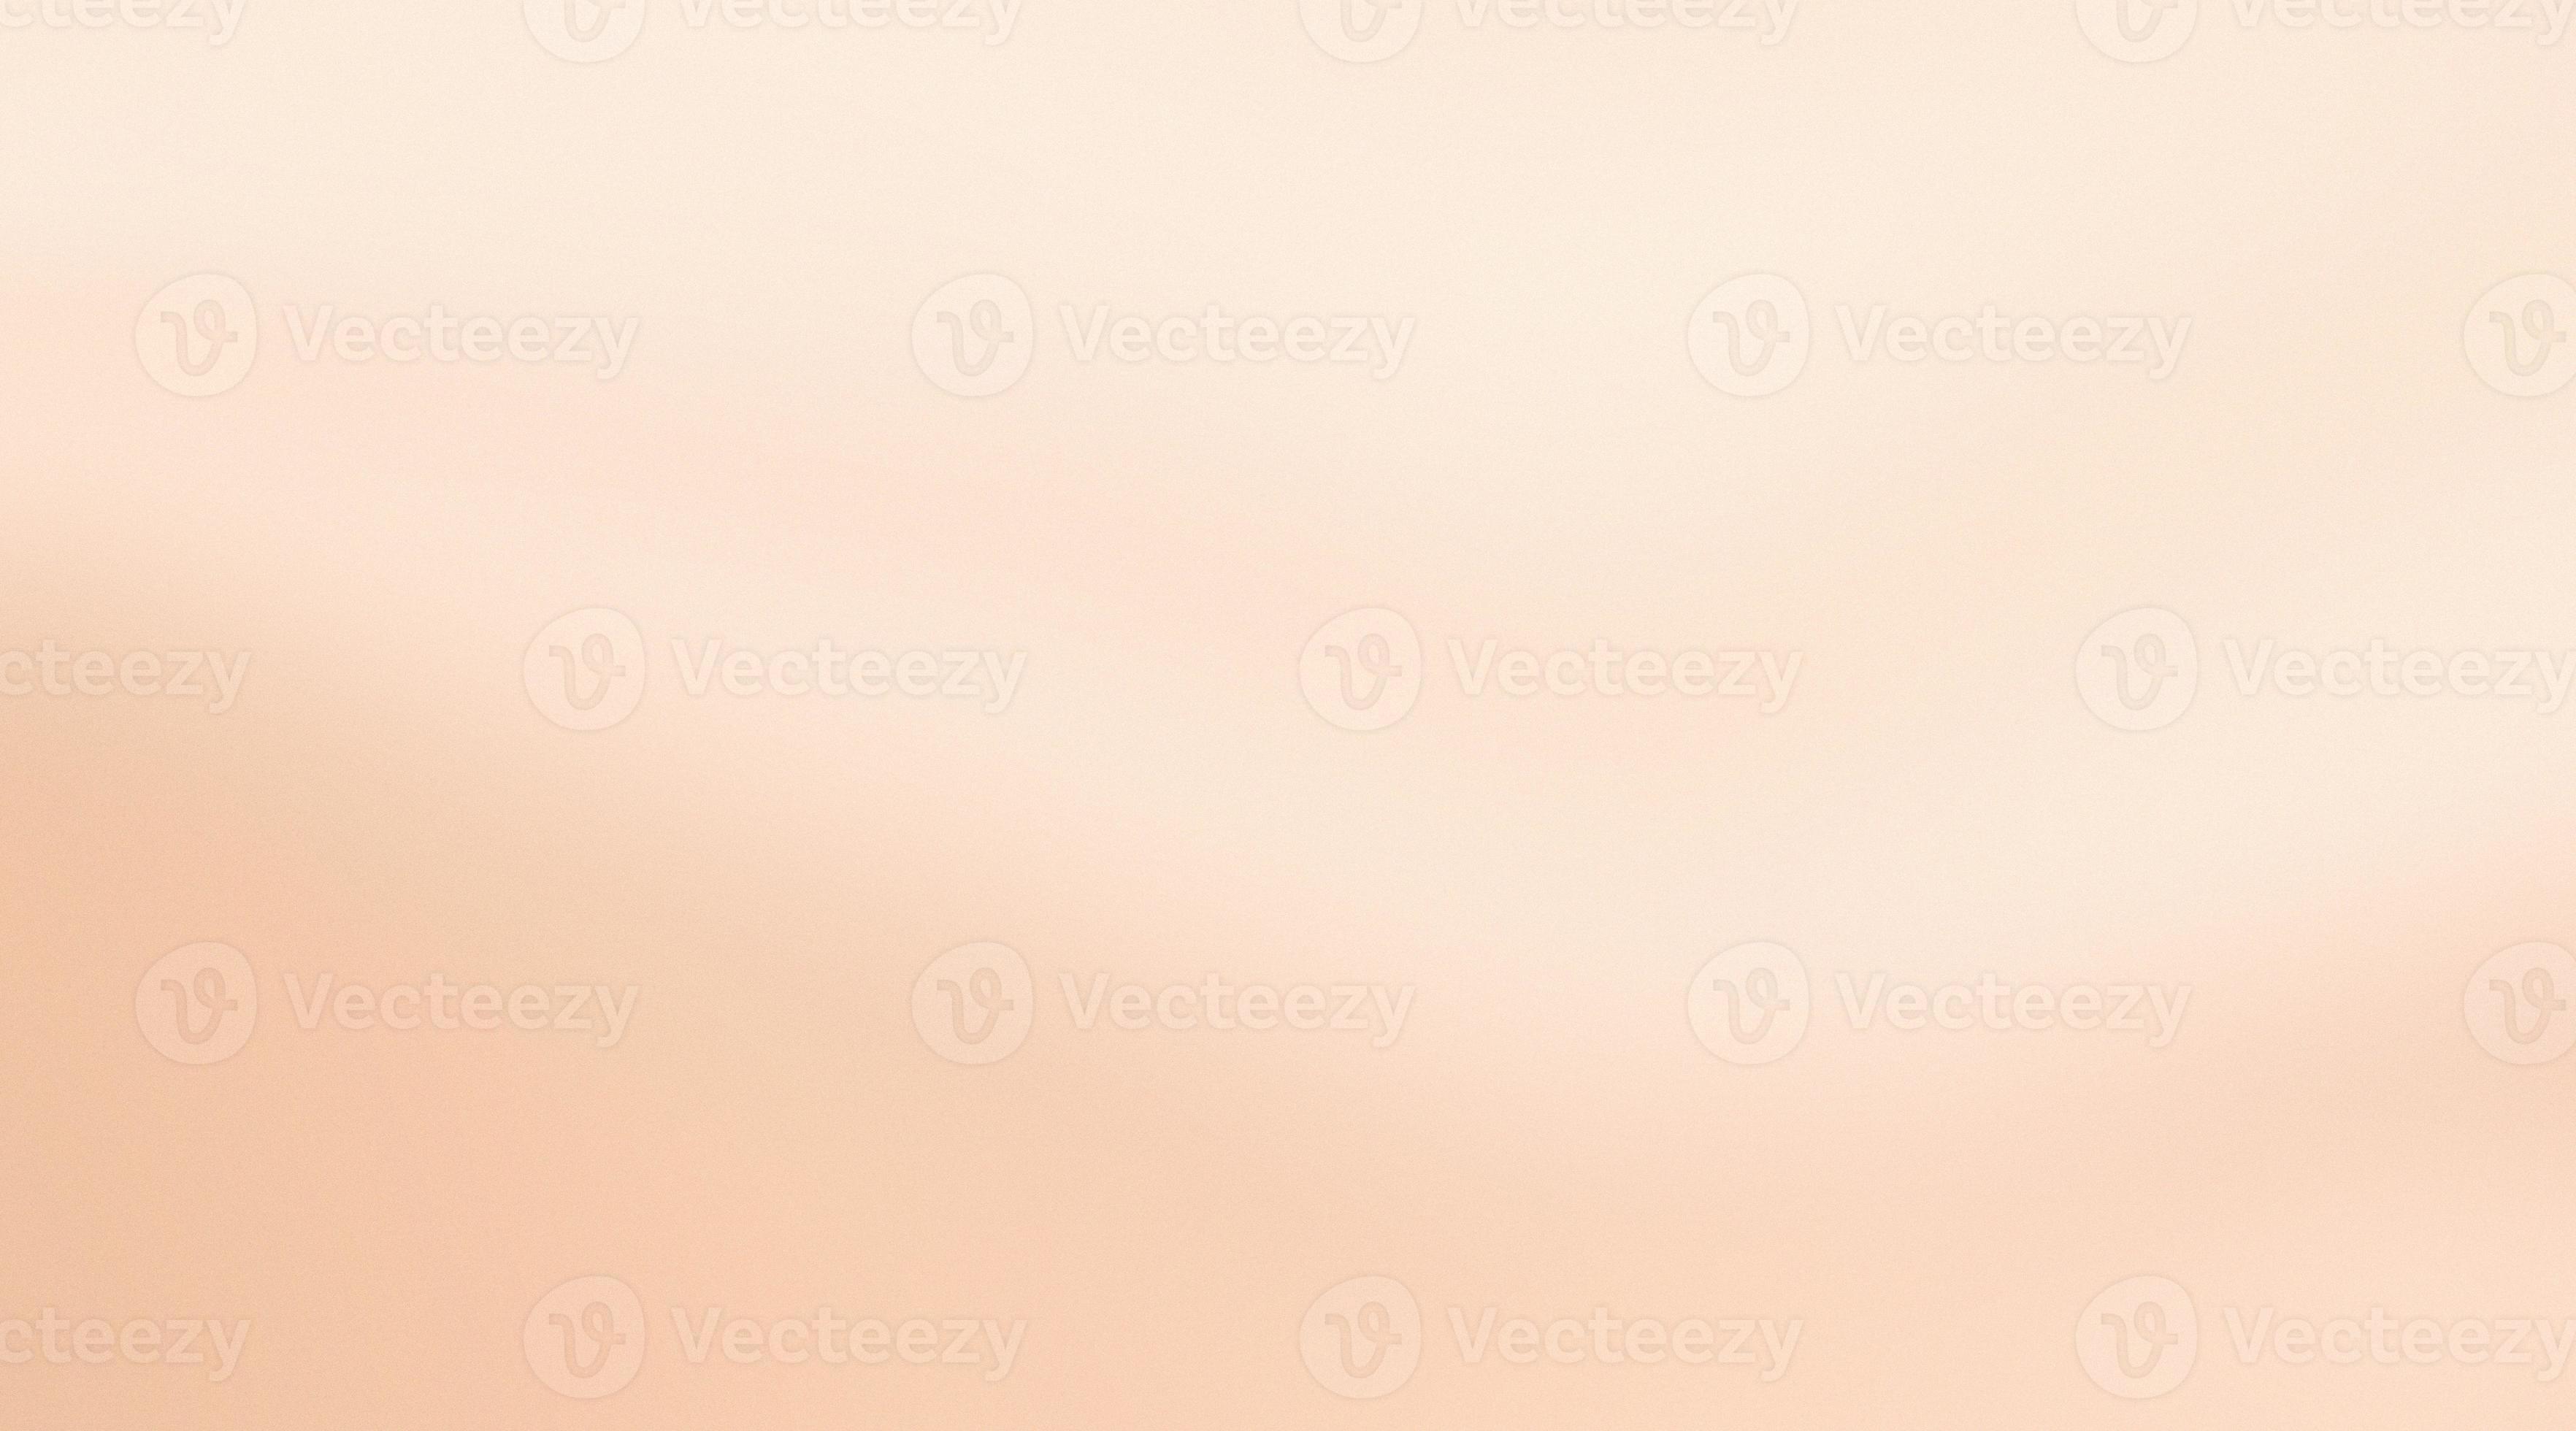 https://static.vecteezy.com/system/resources/previews/022/170/833/large_2x/nude-liquid-foundation-light-beige-grainy-gradient-background-ivory-cosmetics-smooth-texture-banner-copy-space-photo.jpg